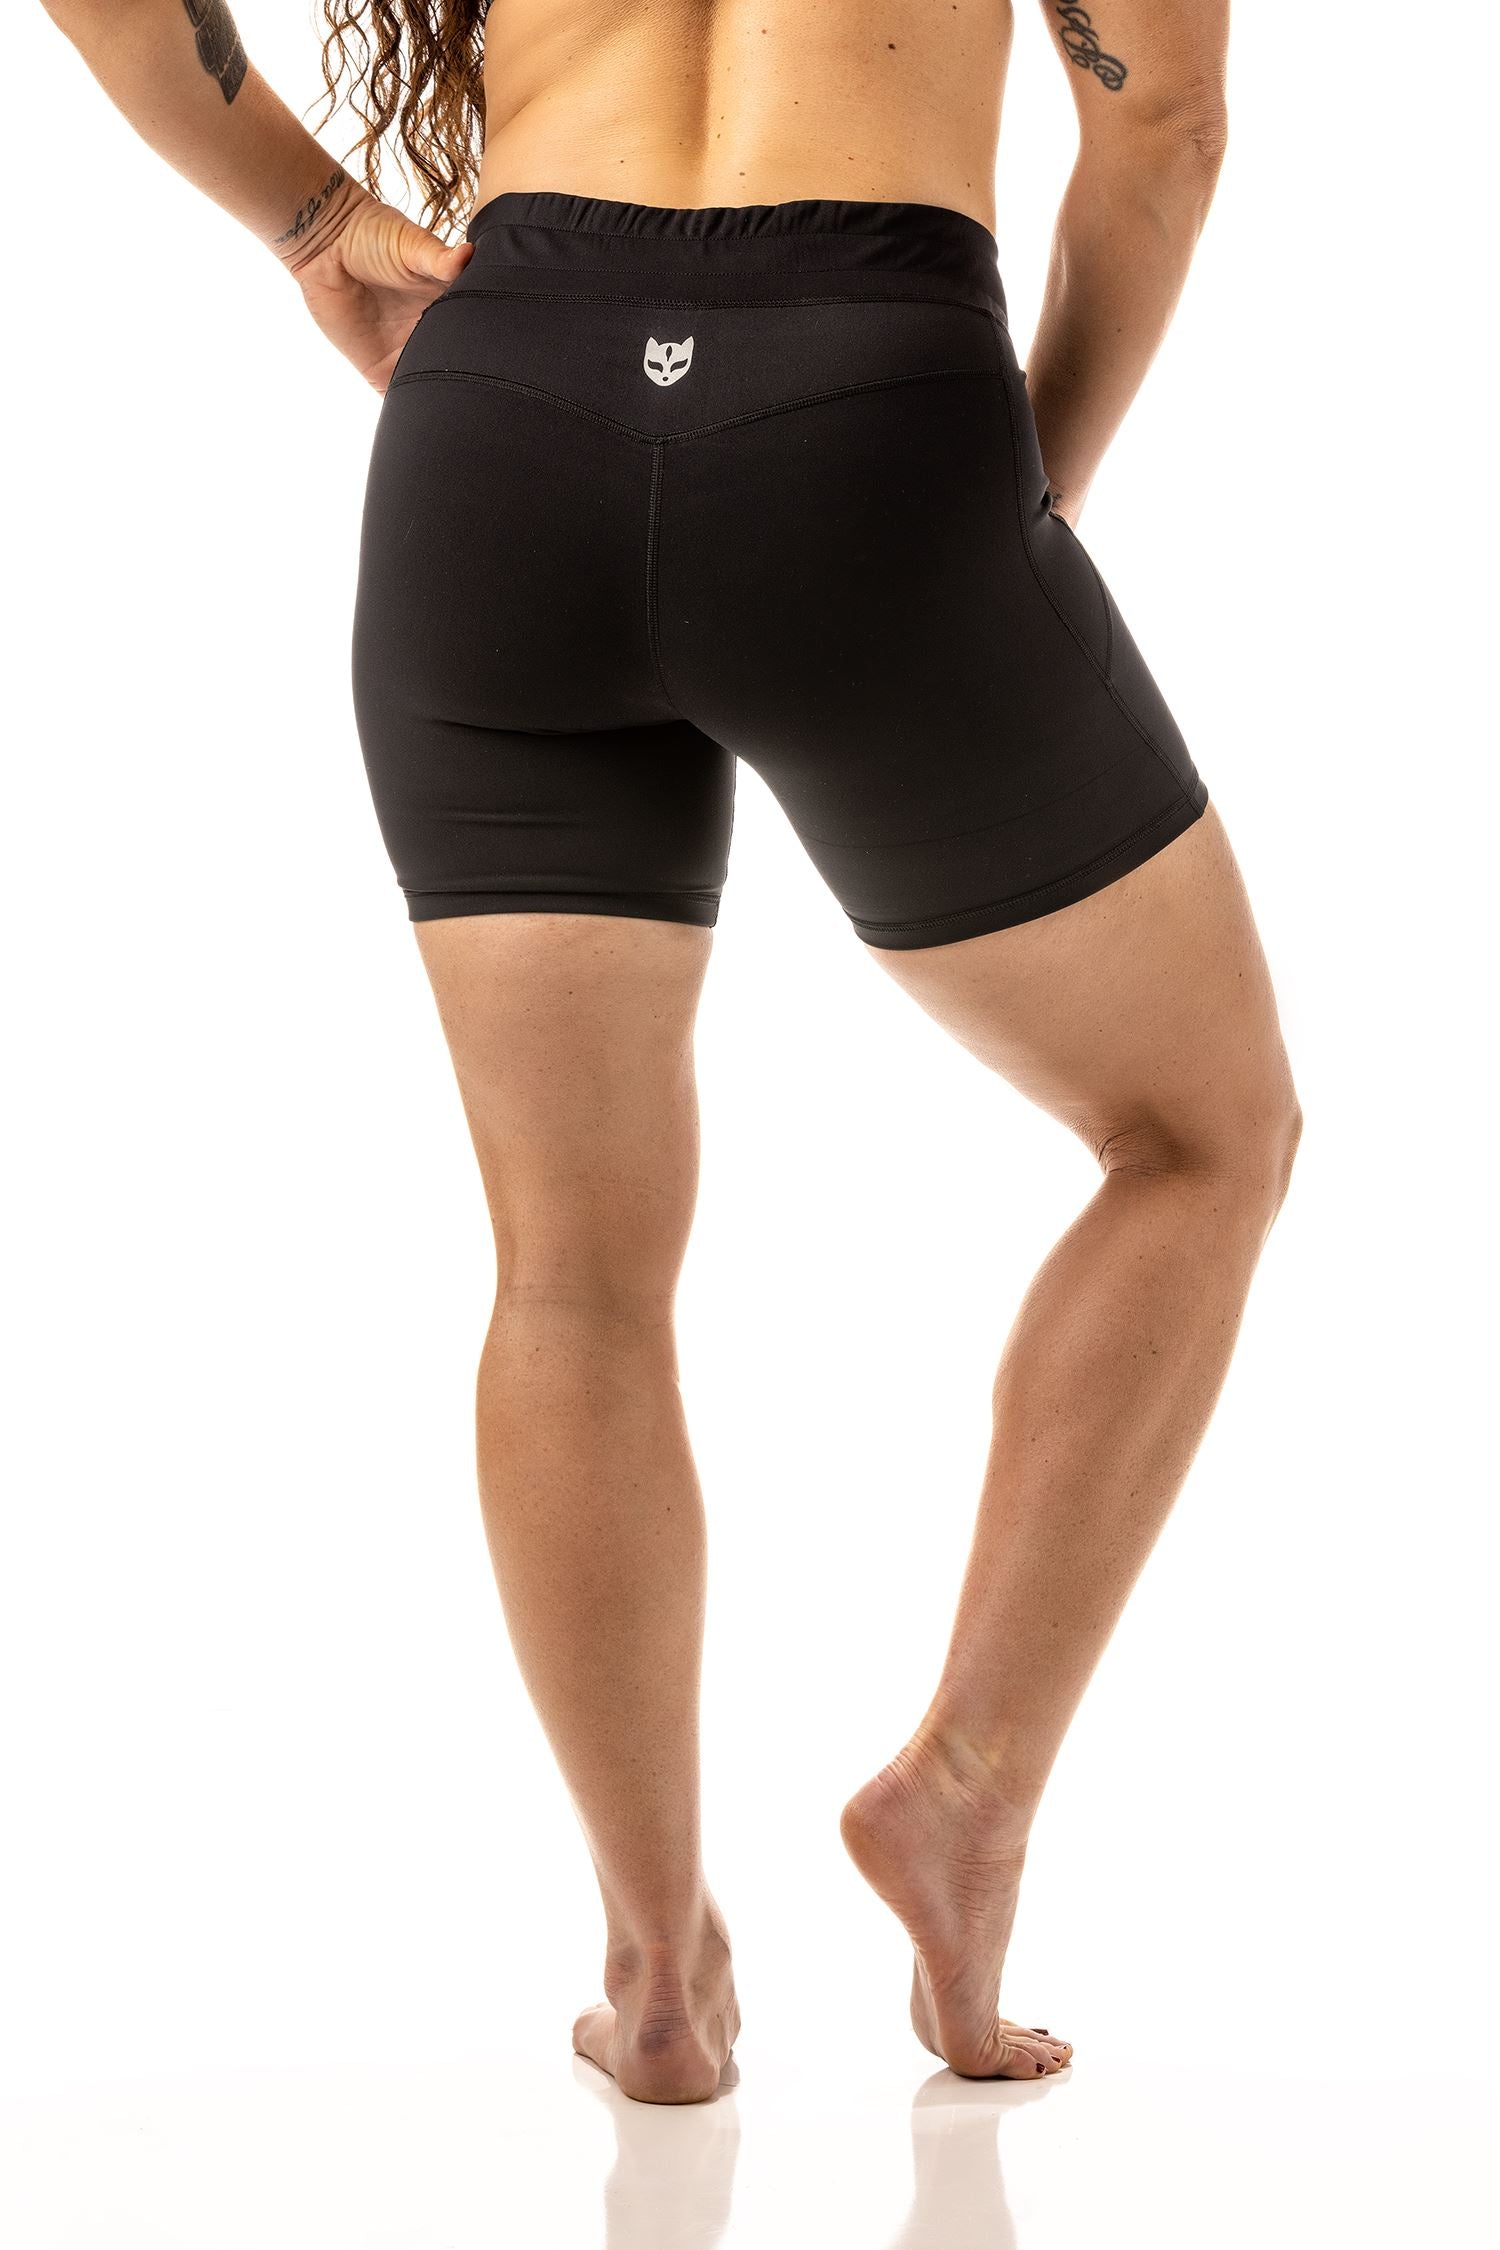 CHOO Womens Add Your Photo Text Sport Wicking Compression Shorts